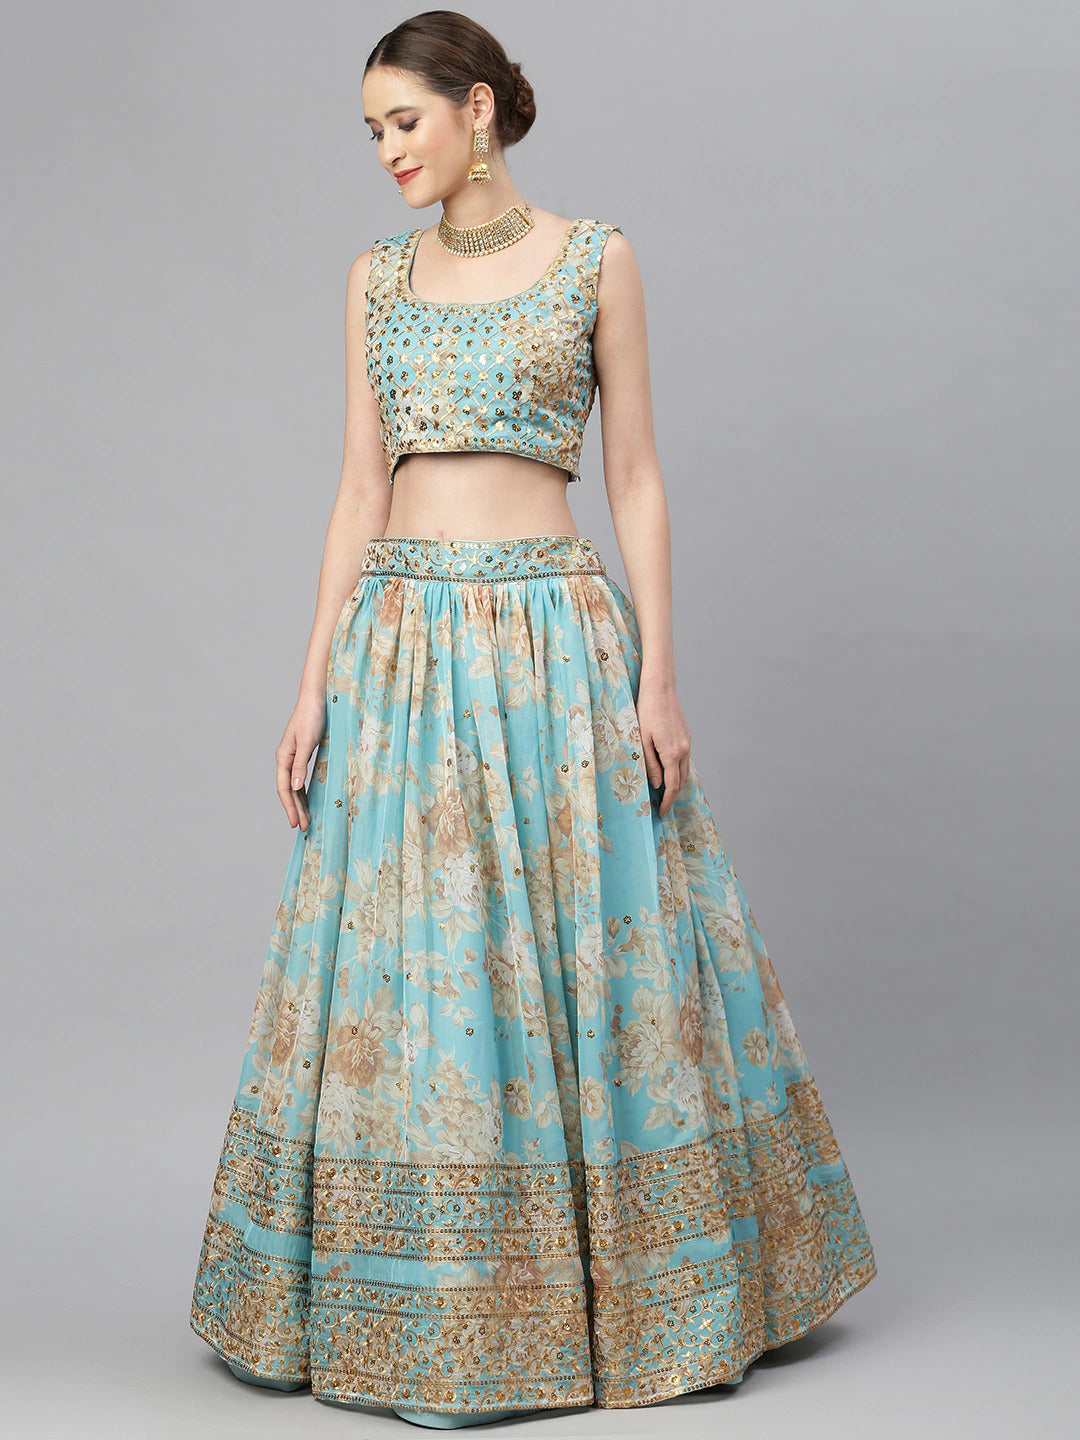 Blue Ariel Lehenga - Indian Clothing in Denver, CO, Aurora, CO, Boulder, CO, Fort Collins, CO, Colorado Springs, CO, Parker, CO, Highlands Ranch, CO, Cherry Creek, CO, Centennial, CO, and Longmont, CO. Nationwide shipping USA - India Fashion X